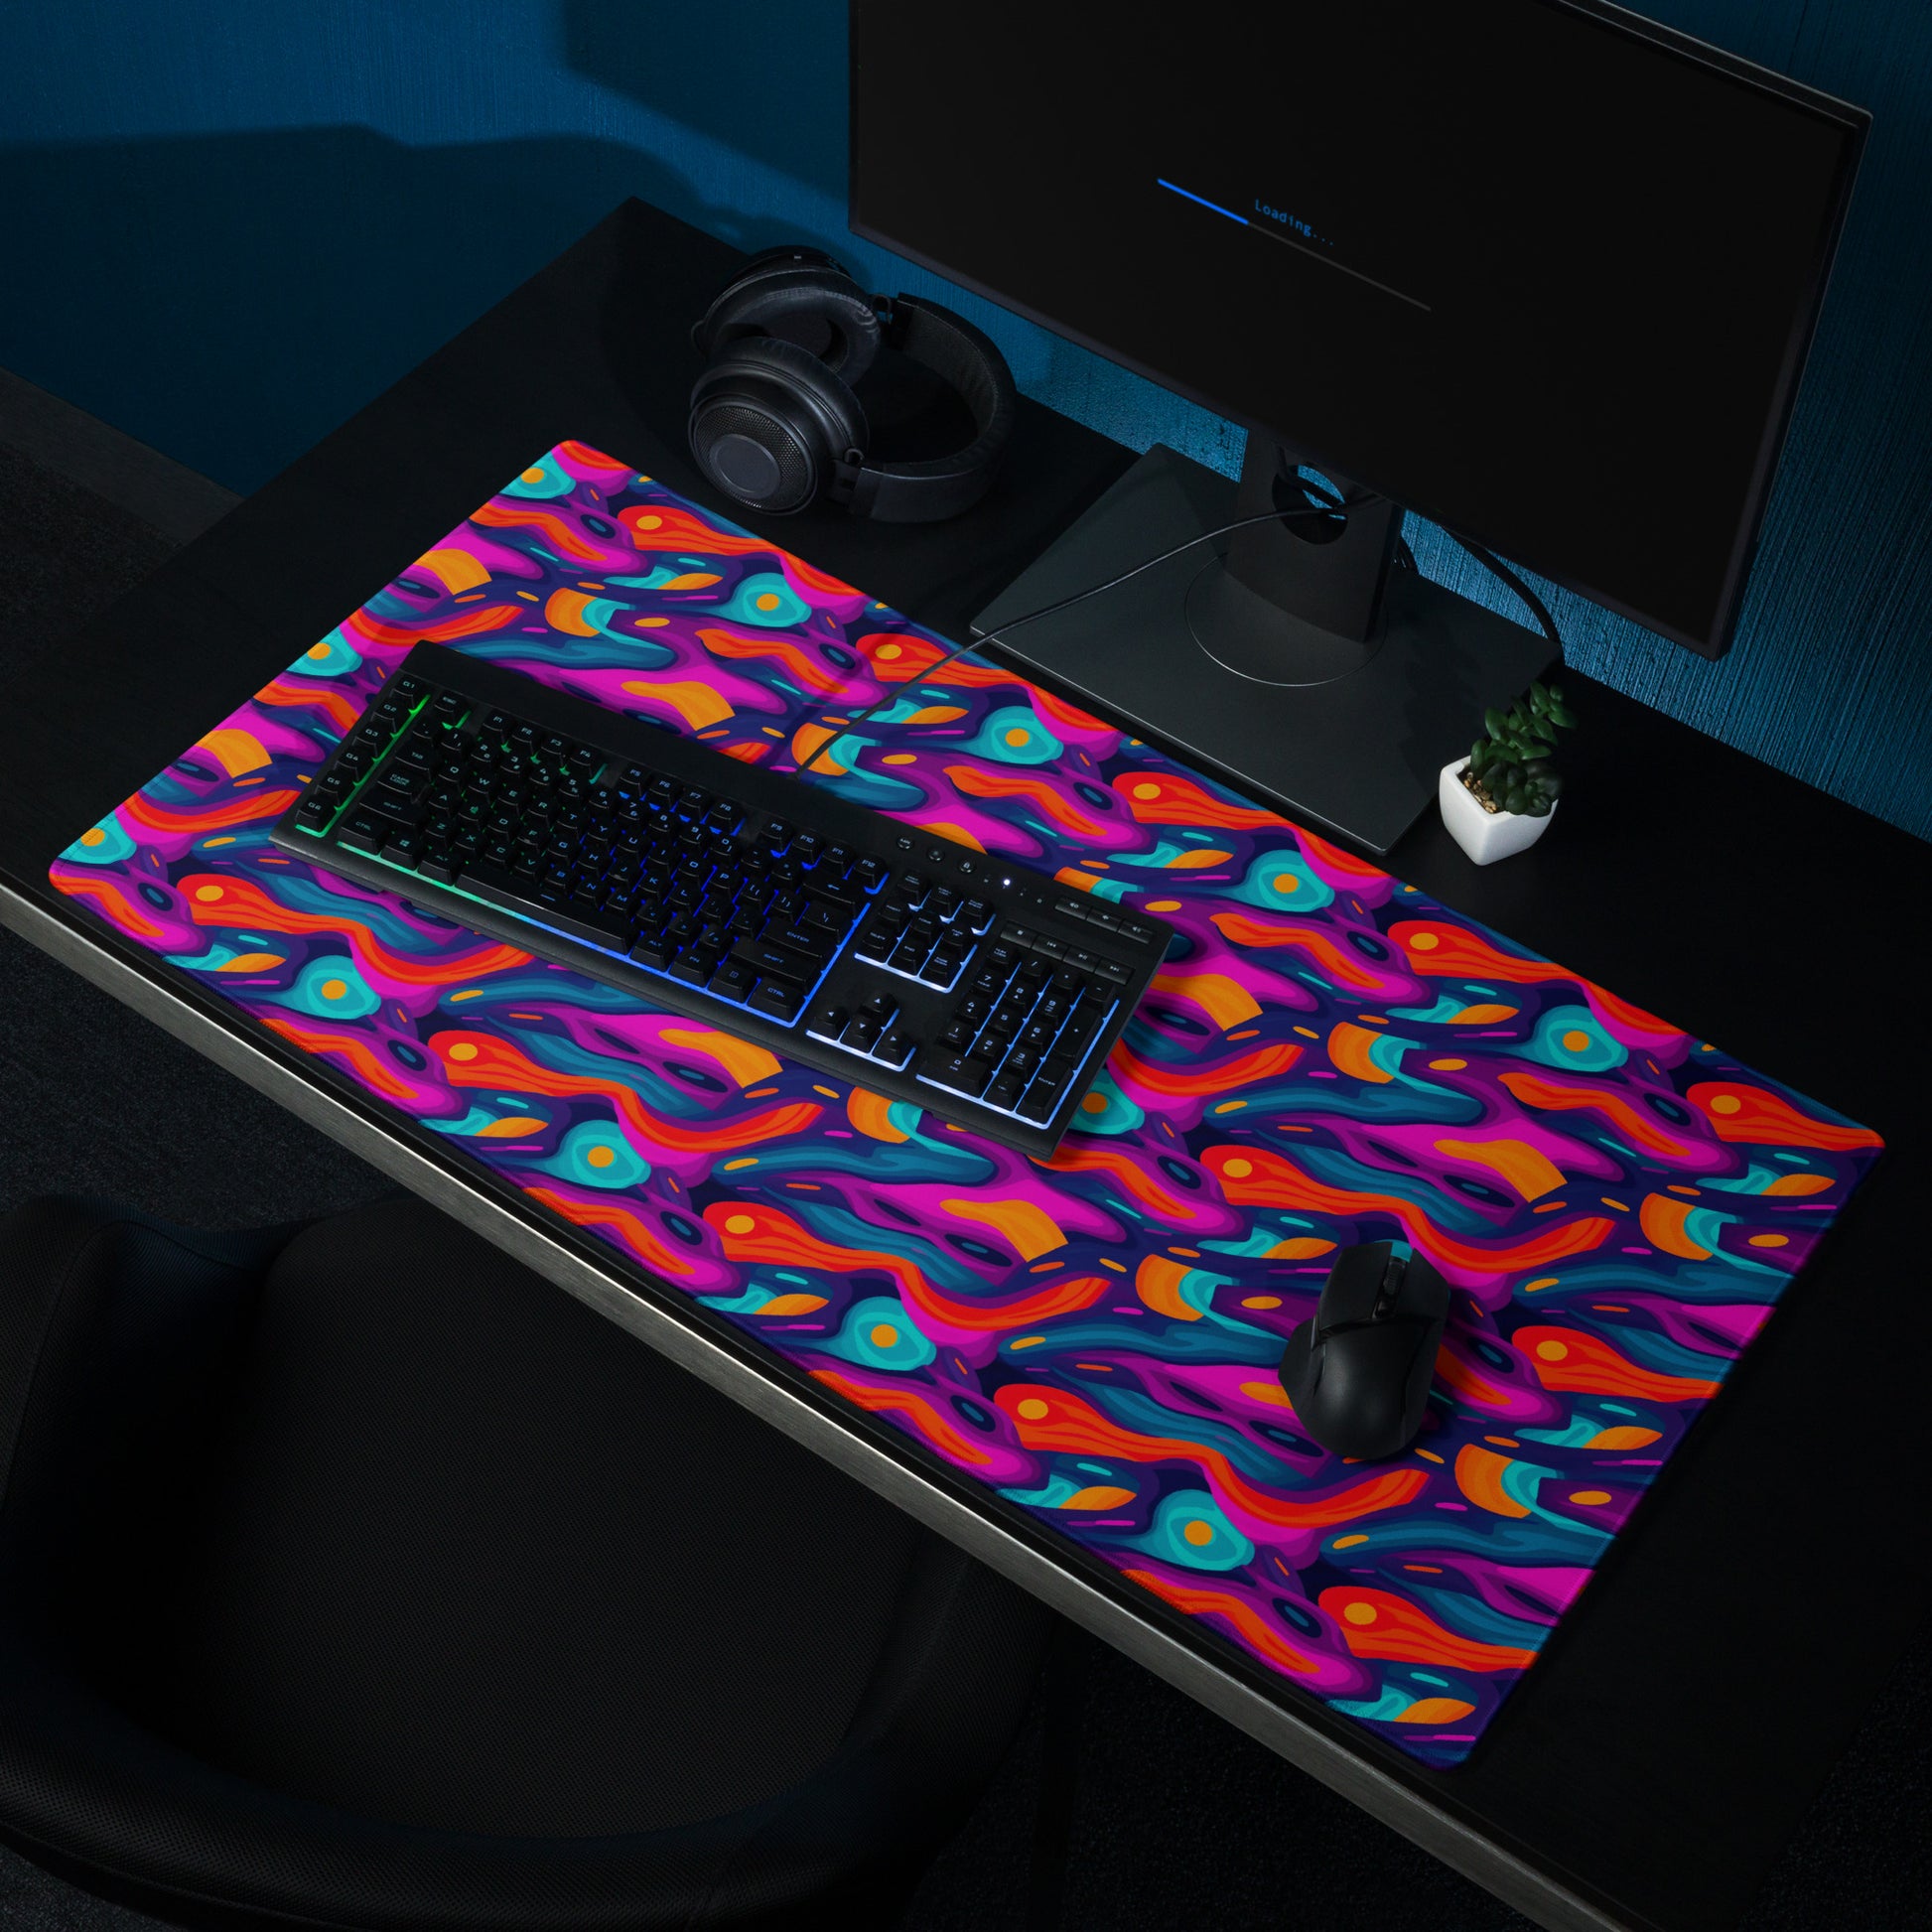 A 36" x 18" desk pad with a wavy abstract pattern on it shown on a desk setup. Blue, Purple and Red in color.